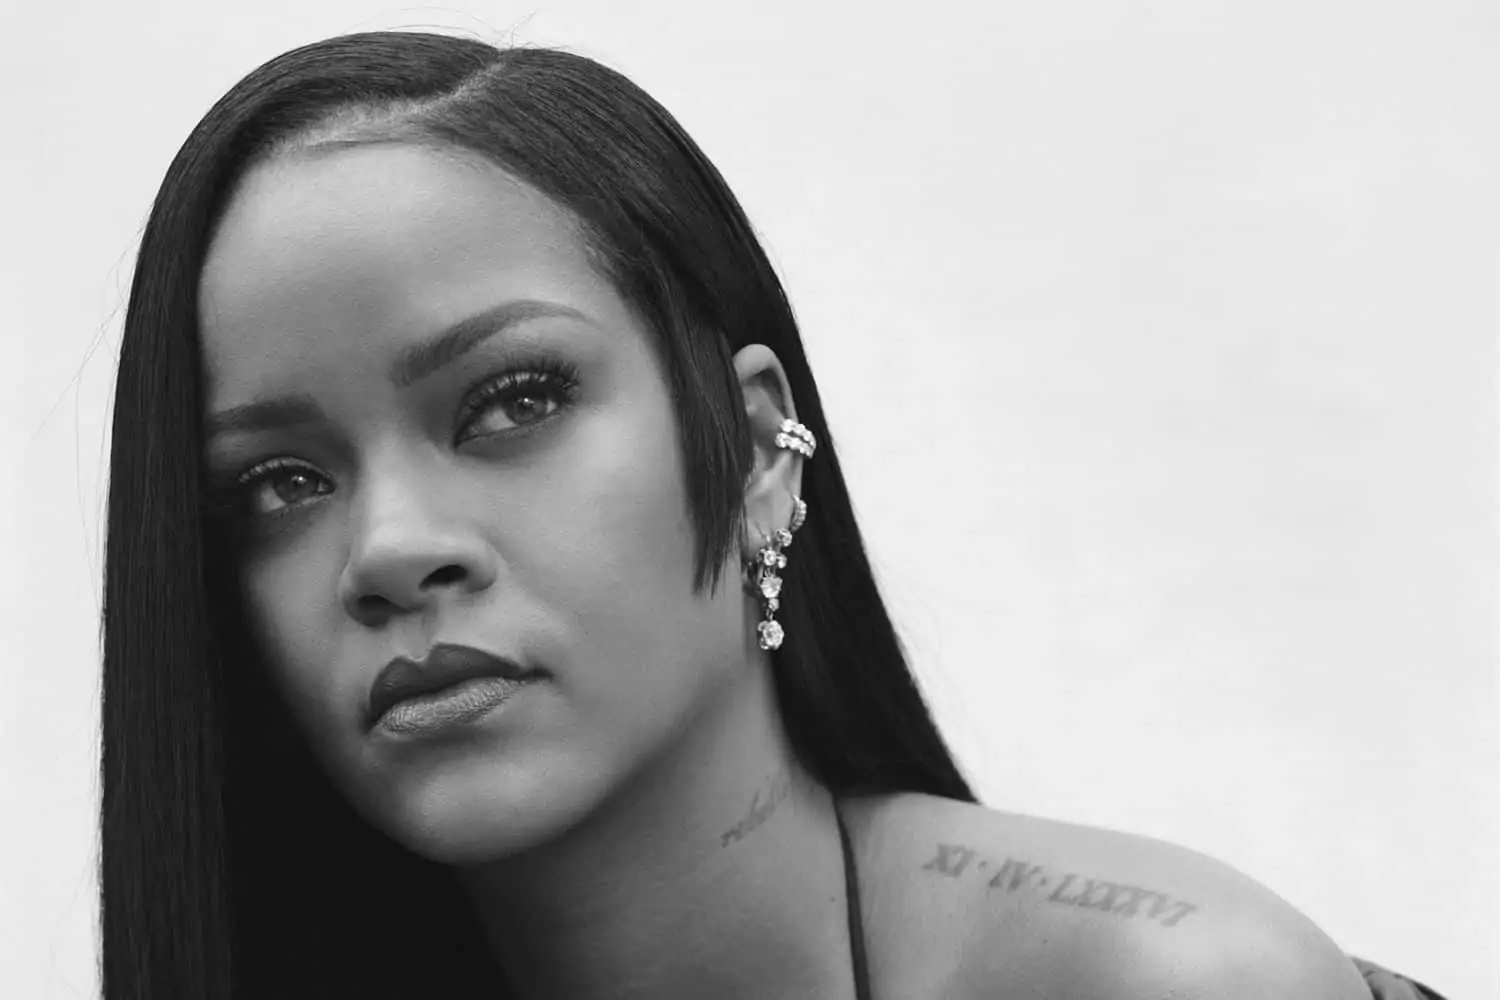 Rihanna is declared as a "national hero" by the new republic, Barbados